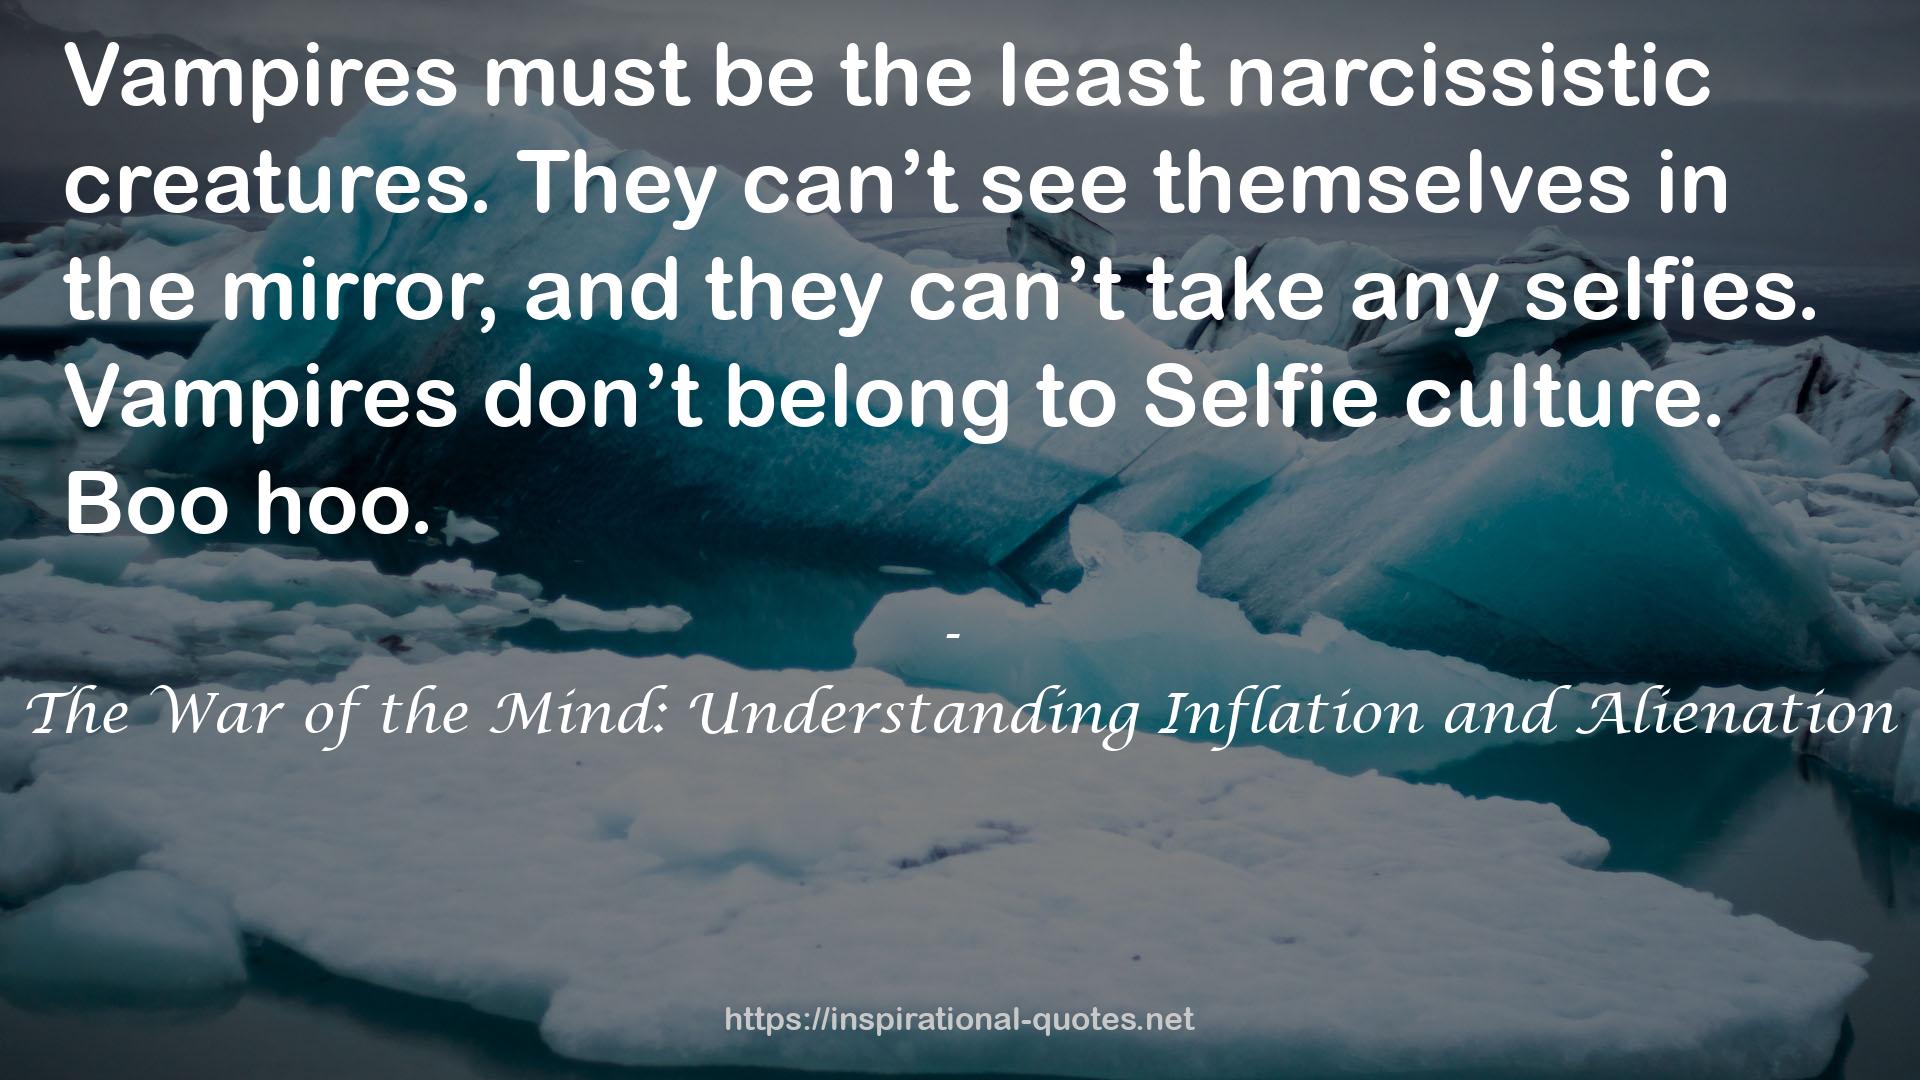 The War of the Mind: Understanding Inflation and Alienation QUOTES